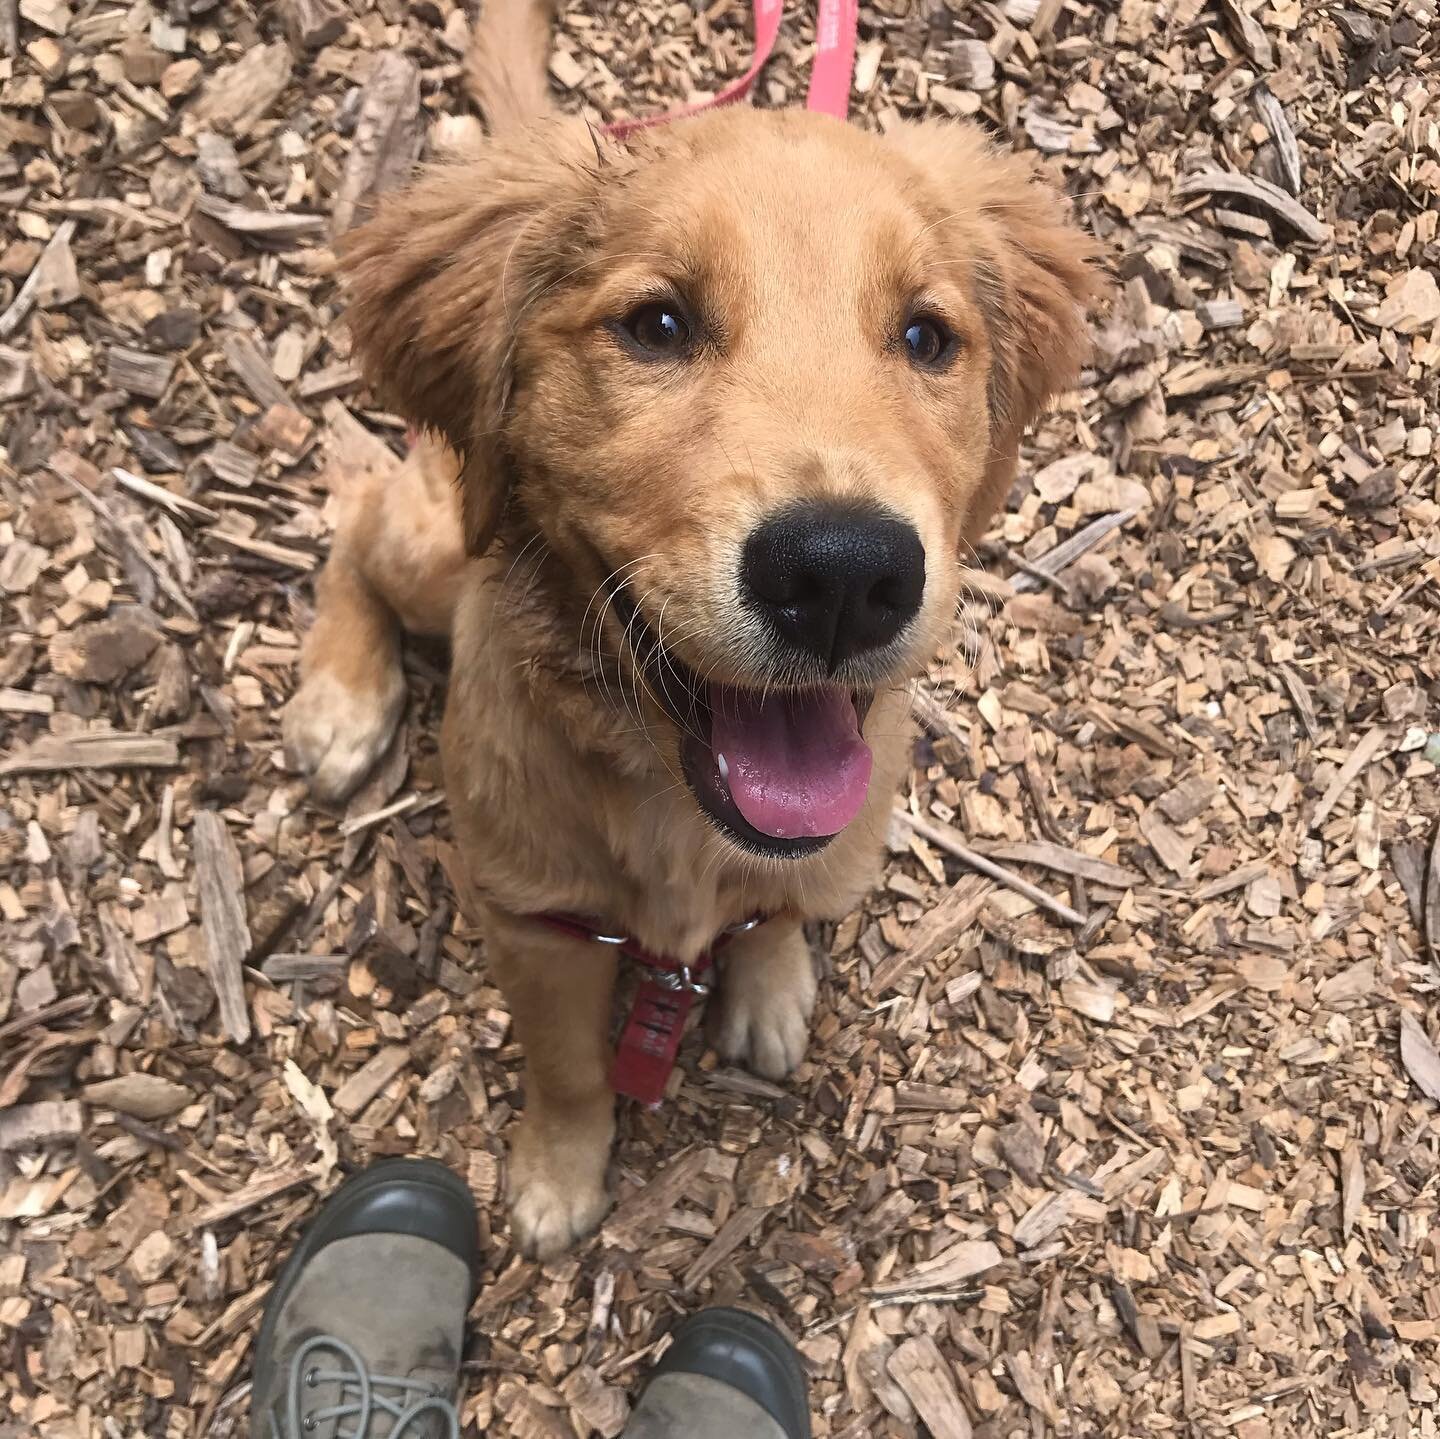 Welcome to the pack Ruby! Ruby attended our puppy socials as a young under vaccinated puppy and is now fully vaccinated and going on walks with her own pack of friends! #dogwalker #dogsofinstagram #gooddog #goldenretriever #dogfriends #dogpark